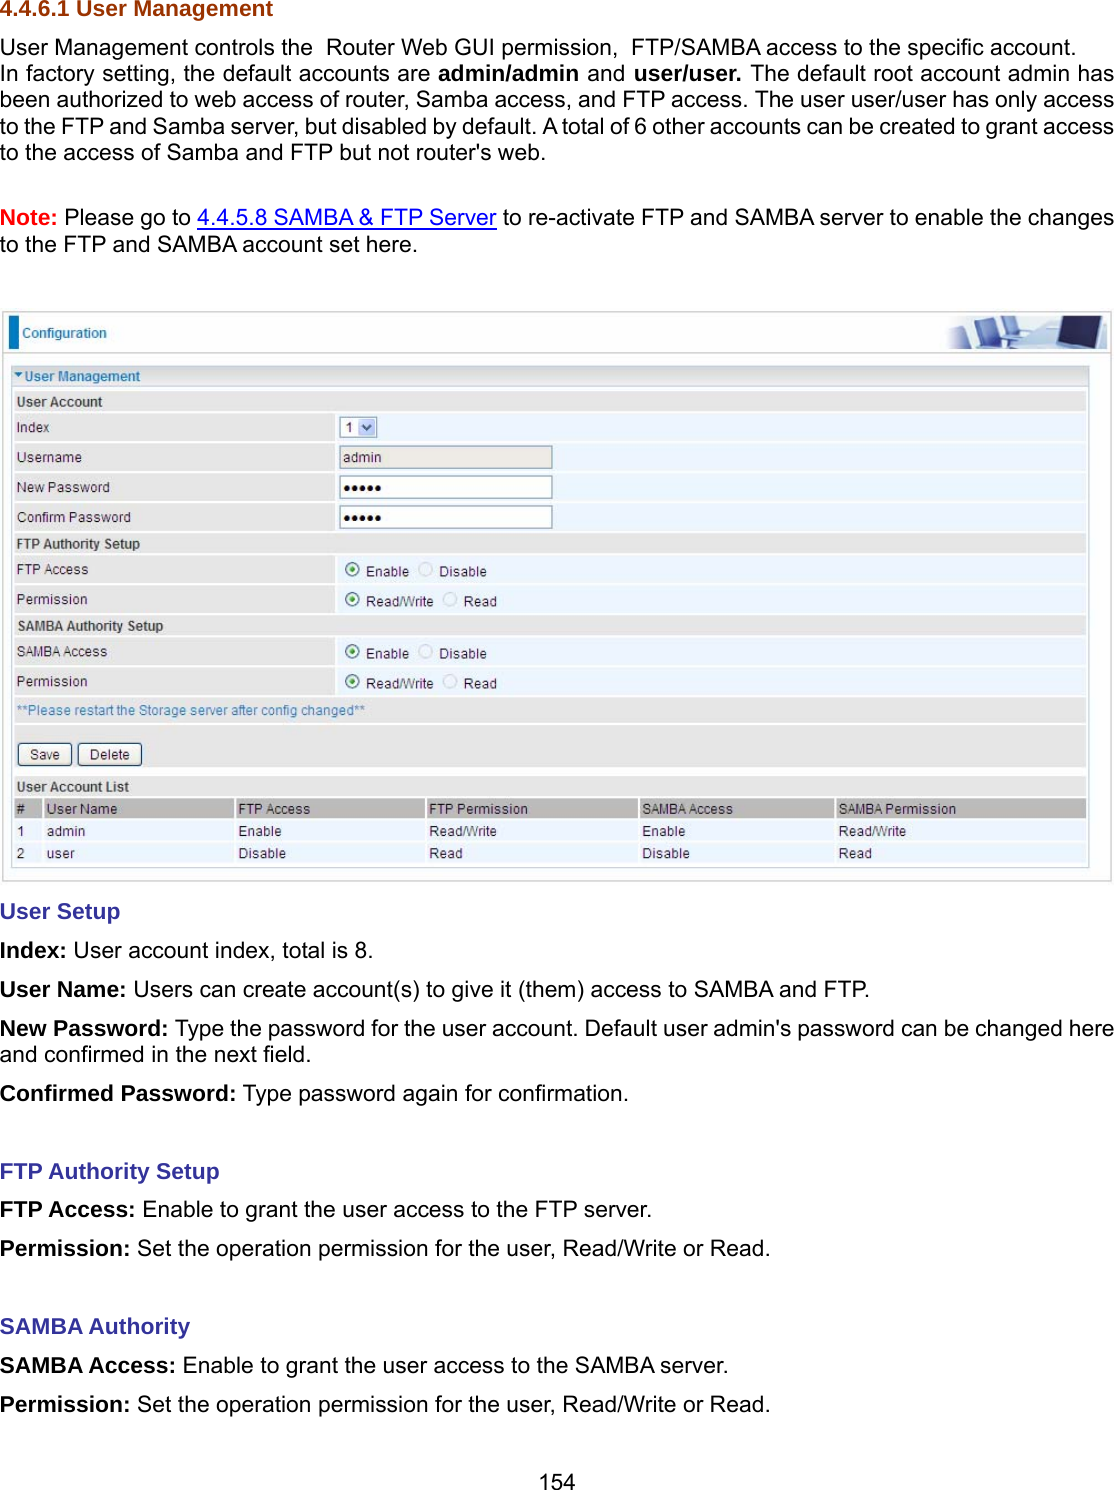 154 4.4.6.1 User Management  User Management controls the  Router Web GUI permission,  FTP/SAMBA access to the specific account.  In factory setting, the default accounts are admin/admin and user/user. The default root account admin has been authorized to web access of router, Samba access, and FTP access. The user user/user has only access to the FTP and Samba server, but disabled by default. A total of 6 other accounts can be created to grant access to the access of Samba and FTP but not router&apos;s web.  Note: Please go to 4.4.5.8 SAMBA &amp; FTP Server to re-activate FTP and SAMBA server to enable the changes to the FTP and SAMBA account set here.    User Setup Index: User account index, total is 8. User Name: Users can create account(s) to give it (them) access to SAMBA and FTP.  New Password: Type the password for the user account. Default user admin&apos;s password can be changed here and confirmed in the next field. Confirmed Password: Type password again for confirmation.  FTP Authority Setup FTP Access: Enable to grant the user access to the FTP server. Permission: Set the operation permission for the user, Read/Write or Read.  SAMBA Authority SAMBA Access: Enable to grant the user access to the SAMBA server. Permission: Set the operation permission for the user, Read/Write or Read. 